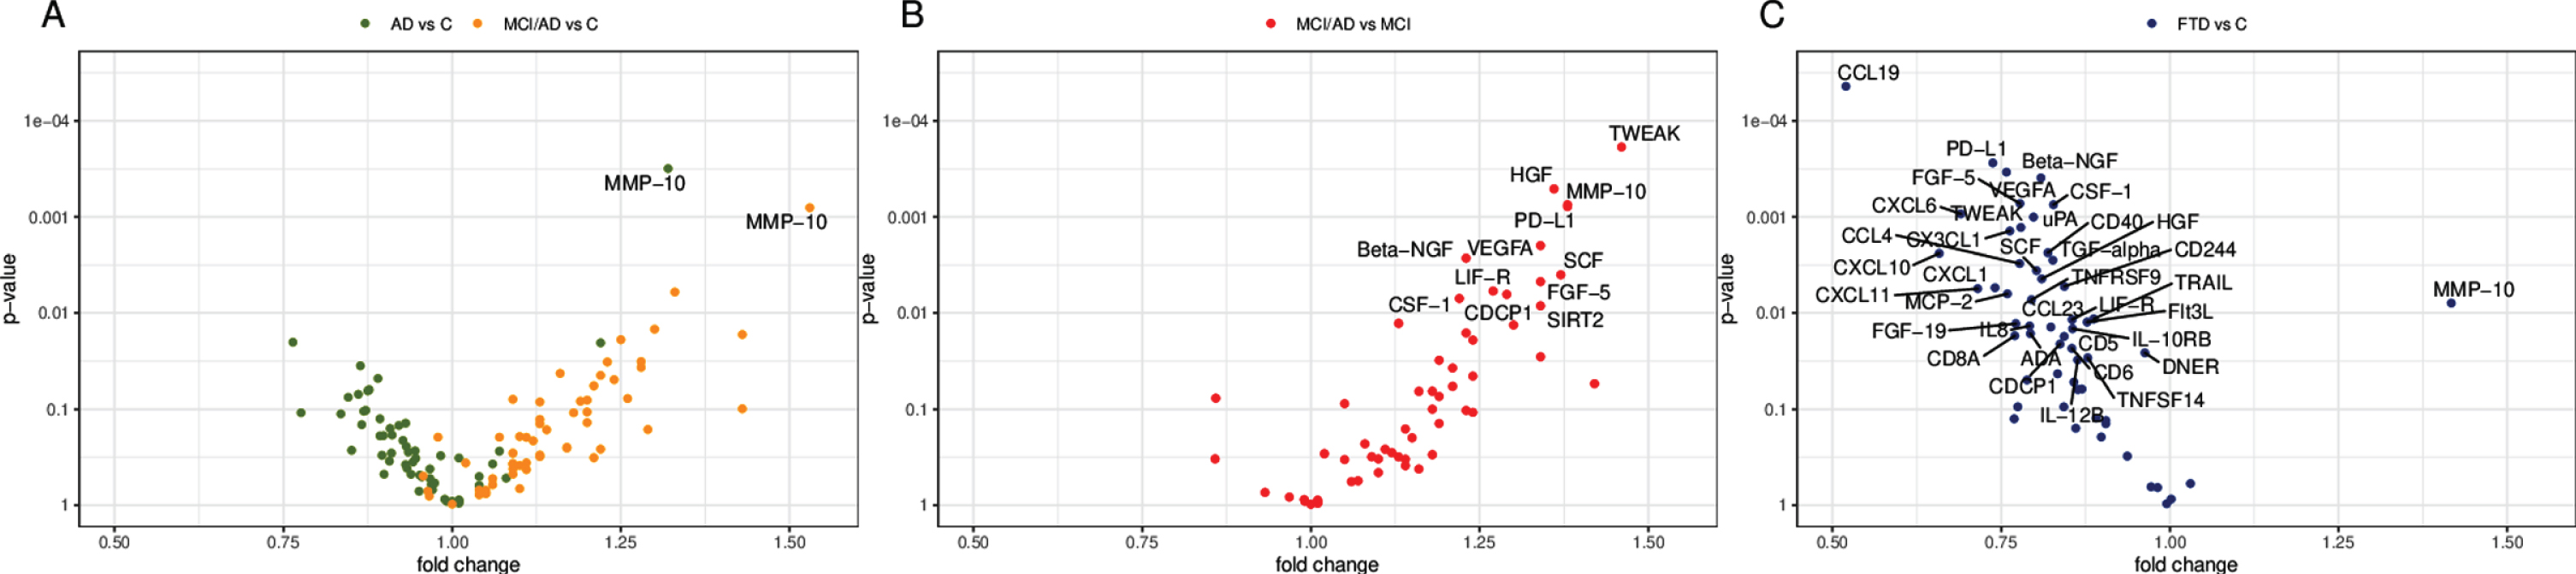 Volcano plots of group differences in cerebrospinal fluid proteins. The plots show fold change and p-values of inflammatory proteins in cerebrospinal fluid from (A) patients with AD and MCI/AD compared with healthy controls, (B) patients with MCI/AD compared with patients with MCI, and (C) patients with FTD compared with healthy controls. The proteins were analyzed using ANOVA F-tests, adjusting for age, sex, plate ID, and study site (A, C), and age, sex, and plate ID (B), respectively. Proteins with a false discovery rate below 0.05 are labeled. AD, Alzheimer’s disease dementia; C, healthy controls; FTD, frontotemporal dementia; MCI, mild cognitive impairment, cognitively stable at the MCI level; MCI/AD, mild cognitive impairment due to Alzheimer’s disease.